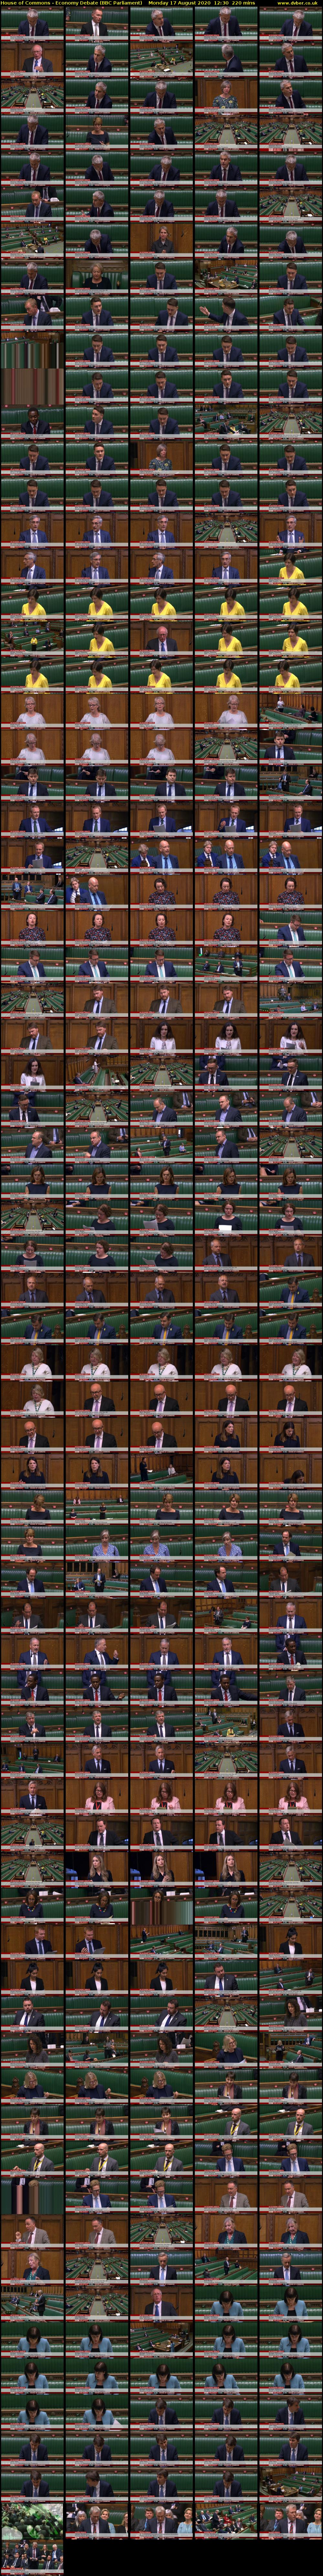 House of Commons - Economy Debate (BBC Parliament) Monday 17 August 2020 12:30 - 16:10